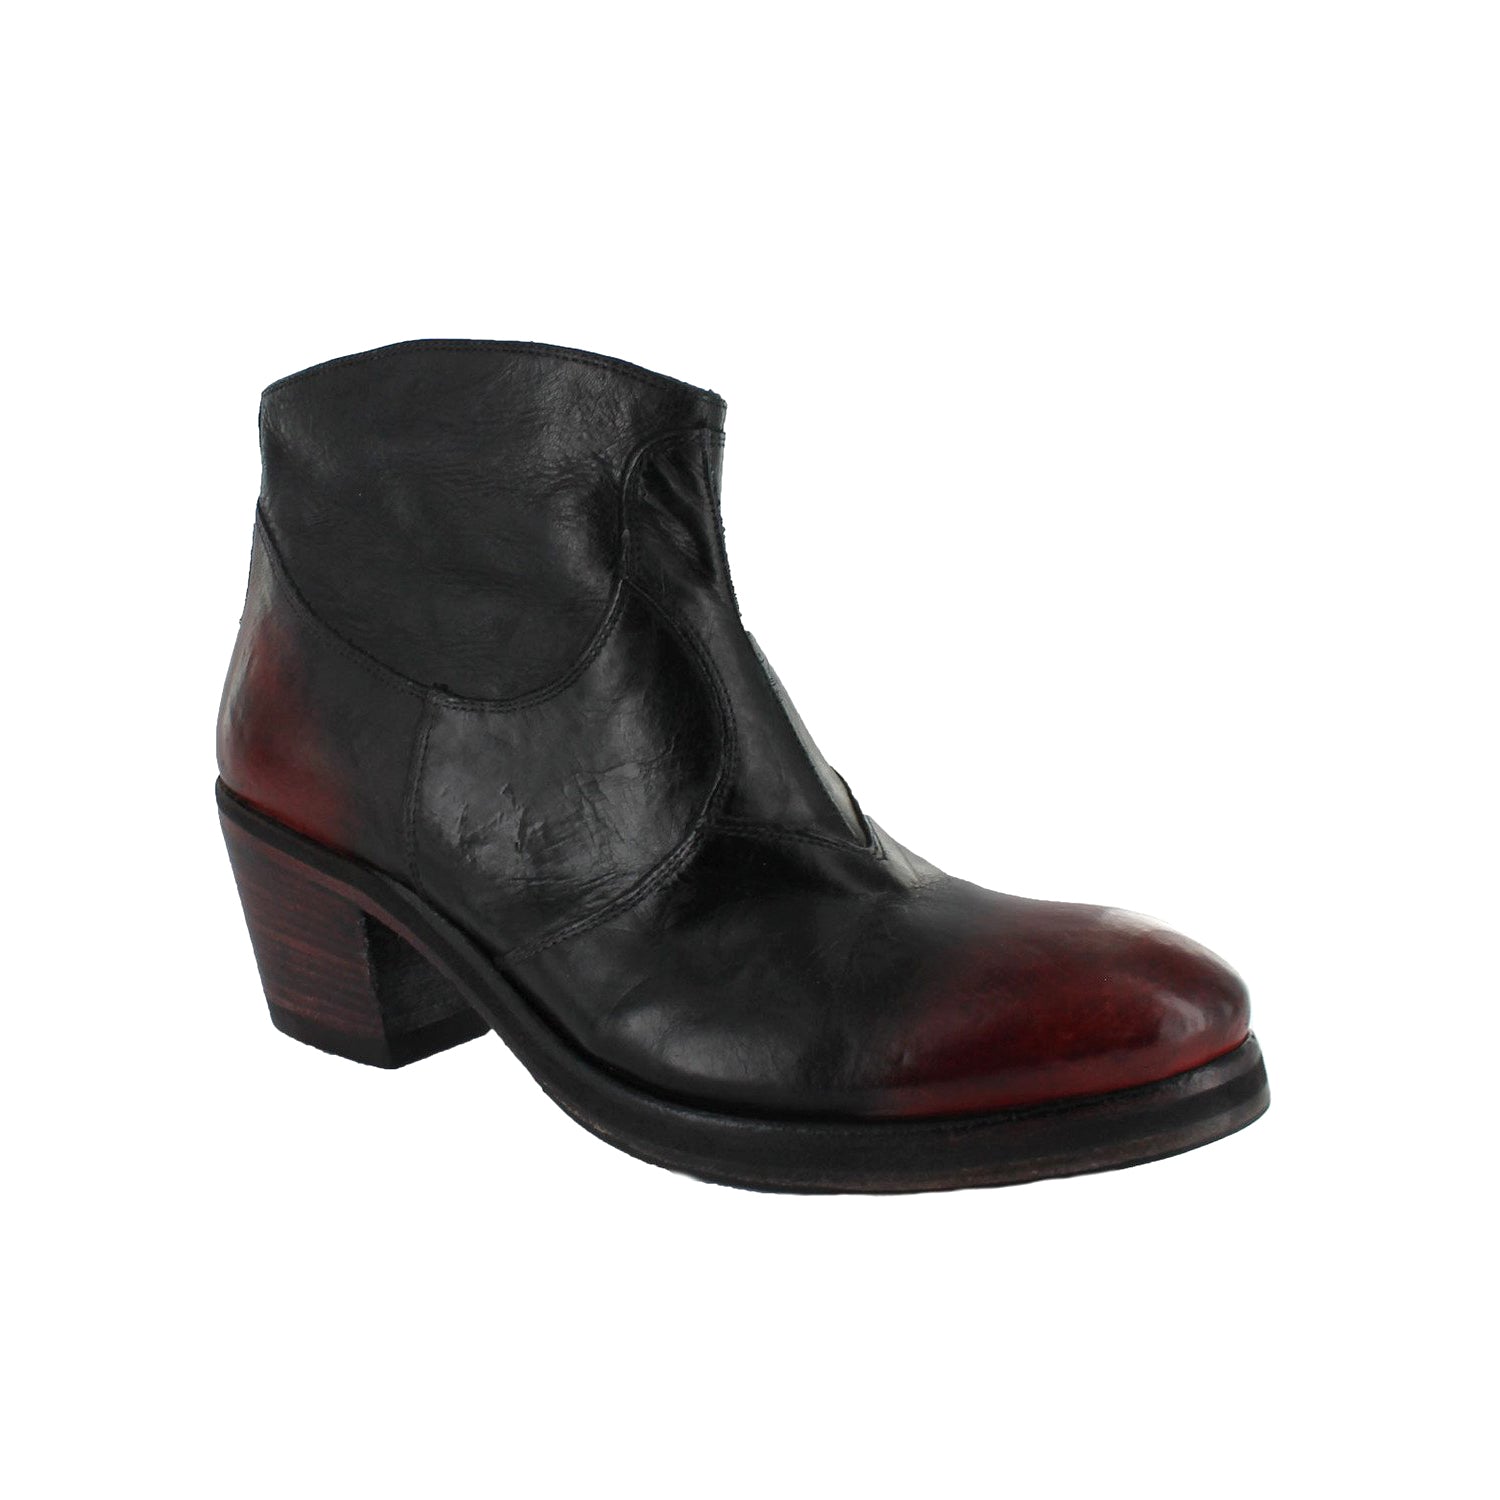 TaniaB - Black Ankle Boot With Cherry Red Toe Cap